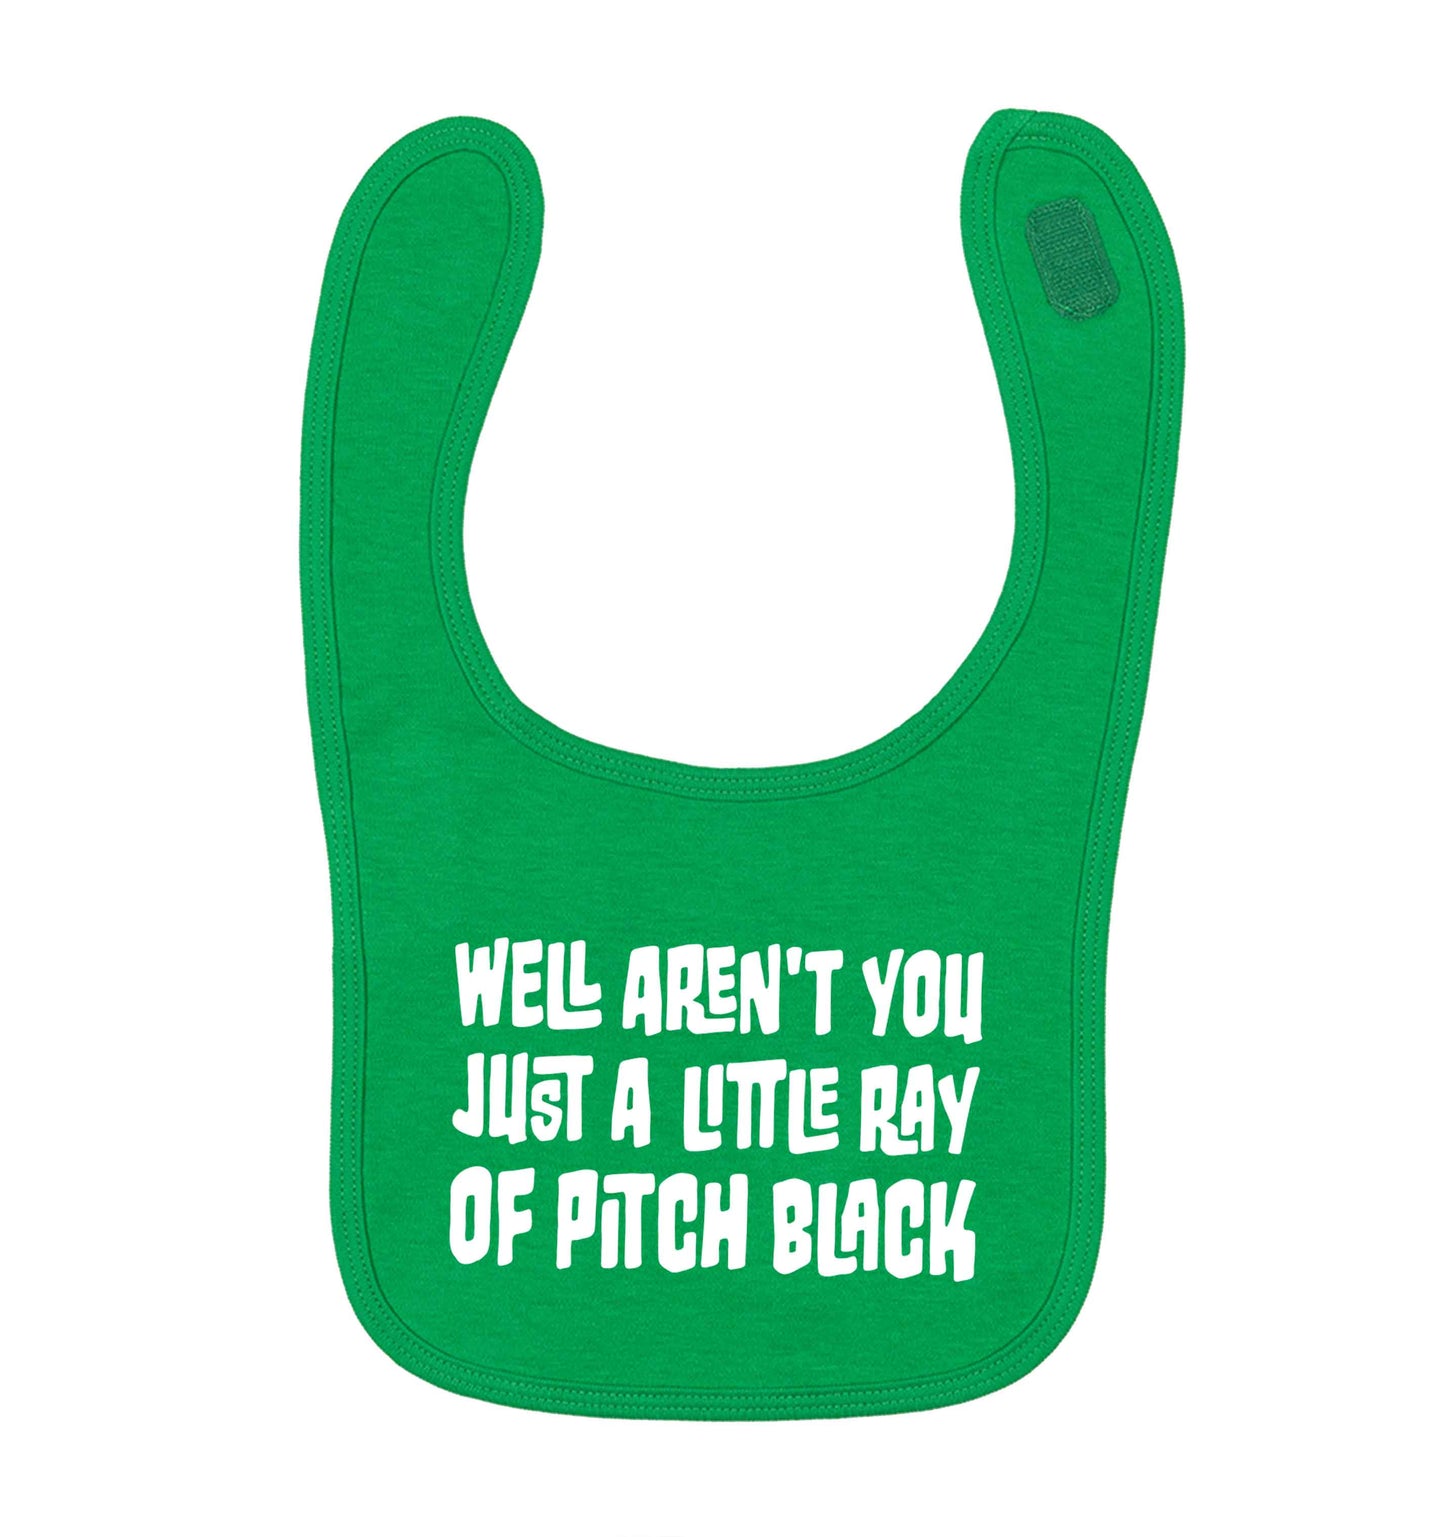 Well aren't you just a little ray of pitch black Kit green baby bib